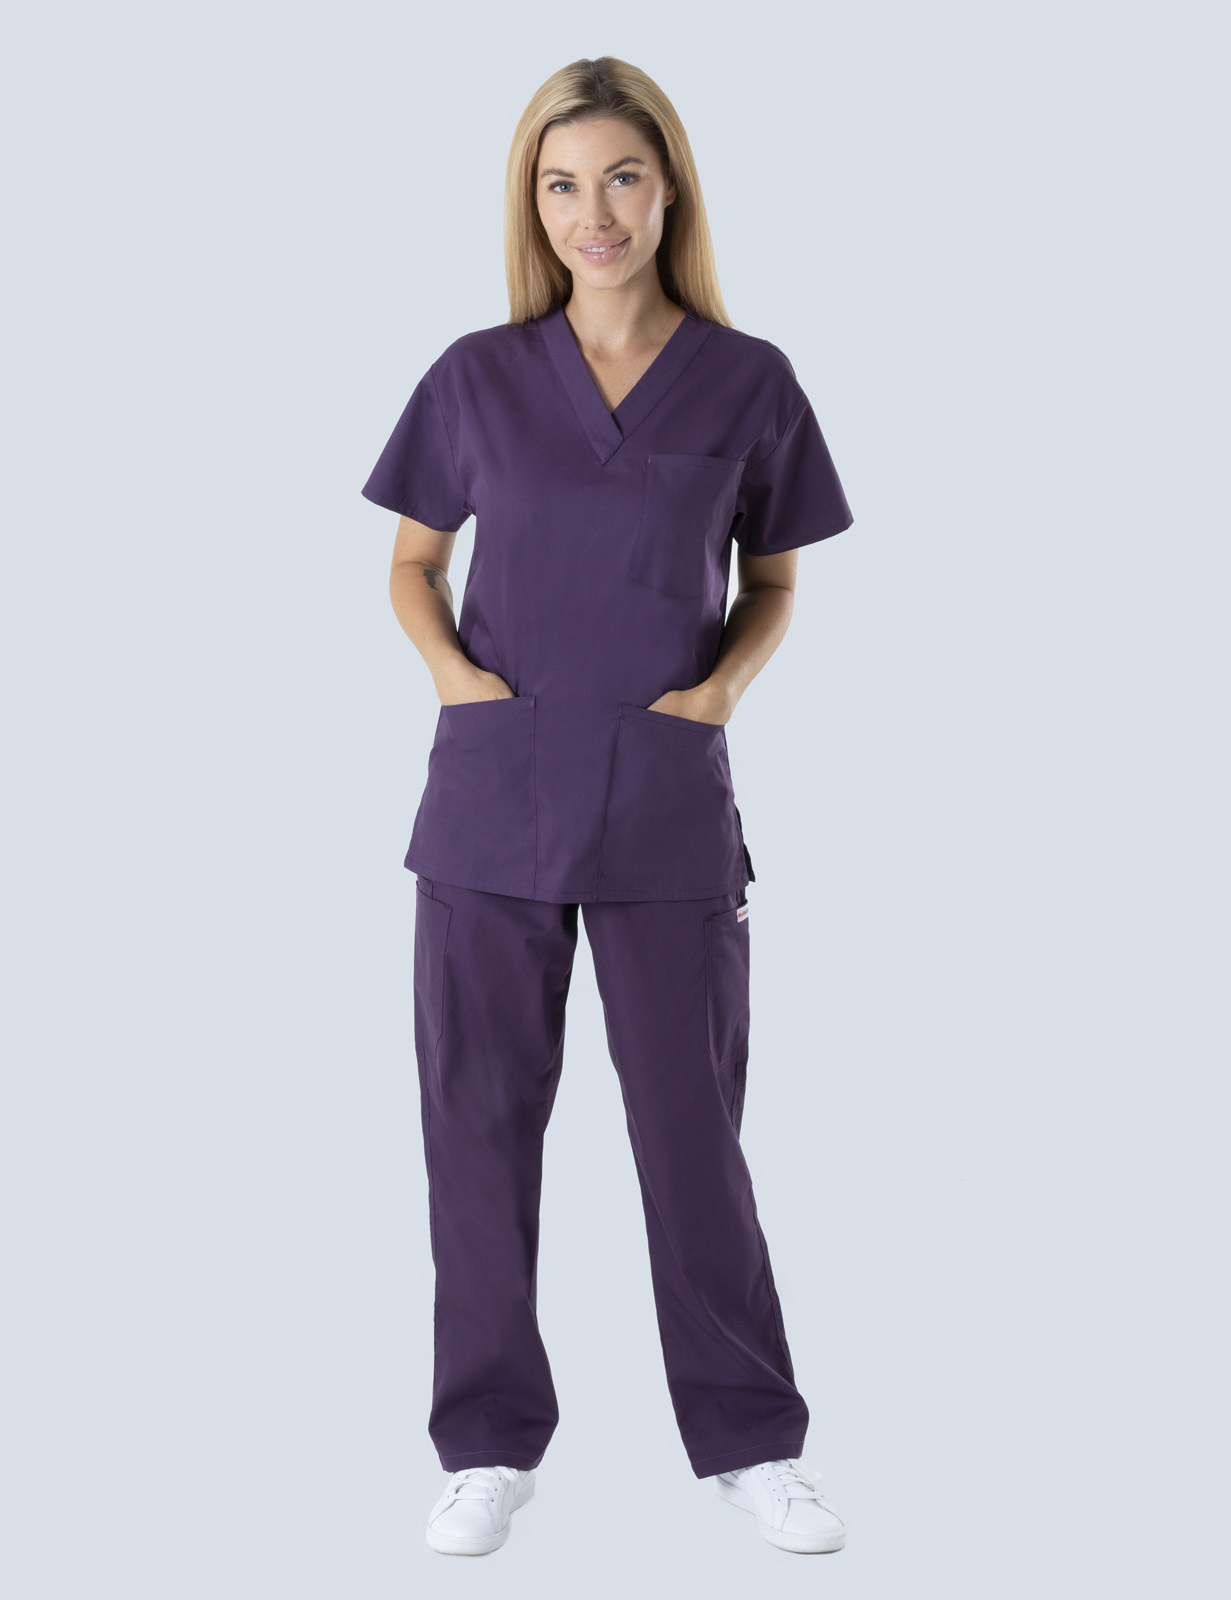 Nambour Hospital - Midwife (4 Pocket Scrub Top and Cargo Pants in Aubergine incl Logos)